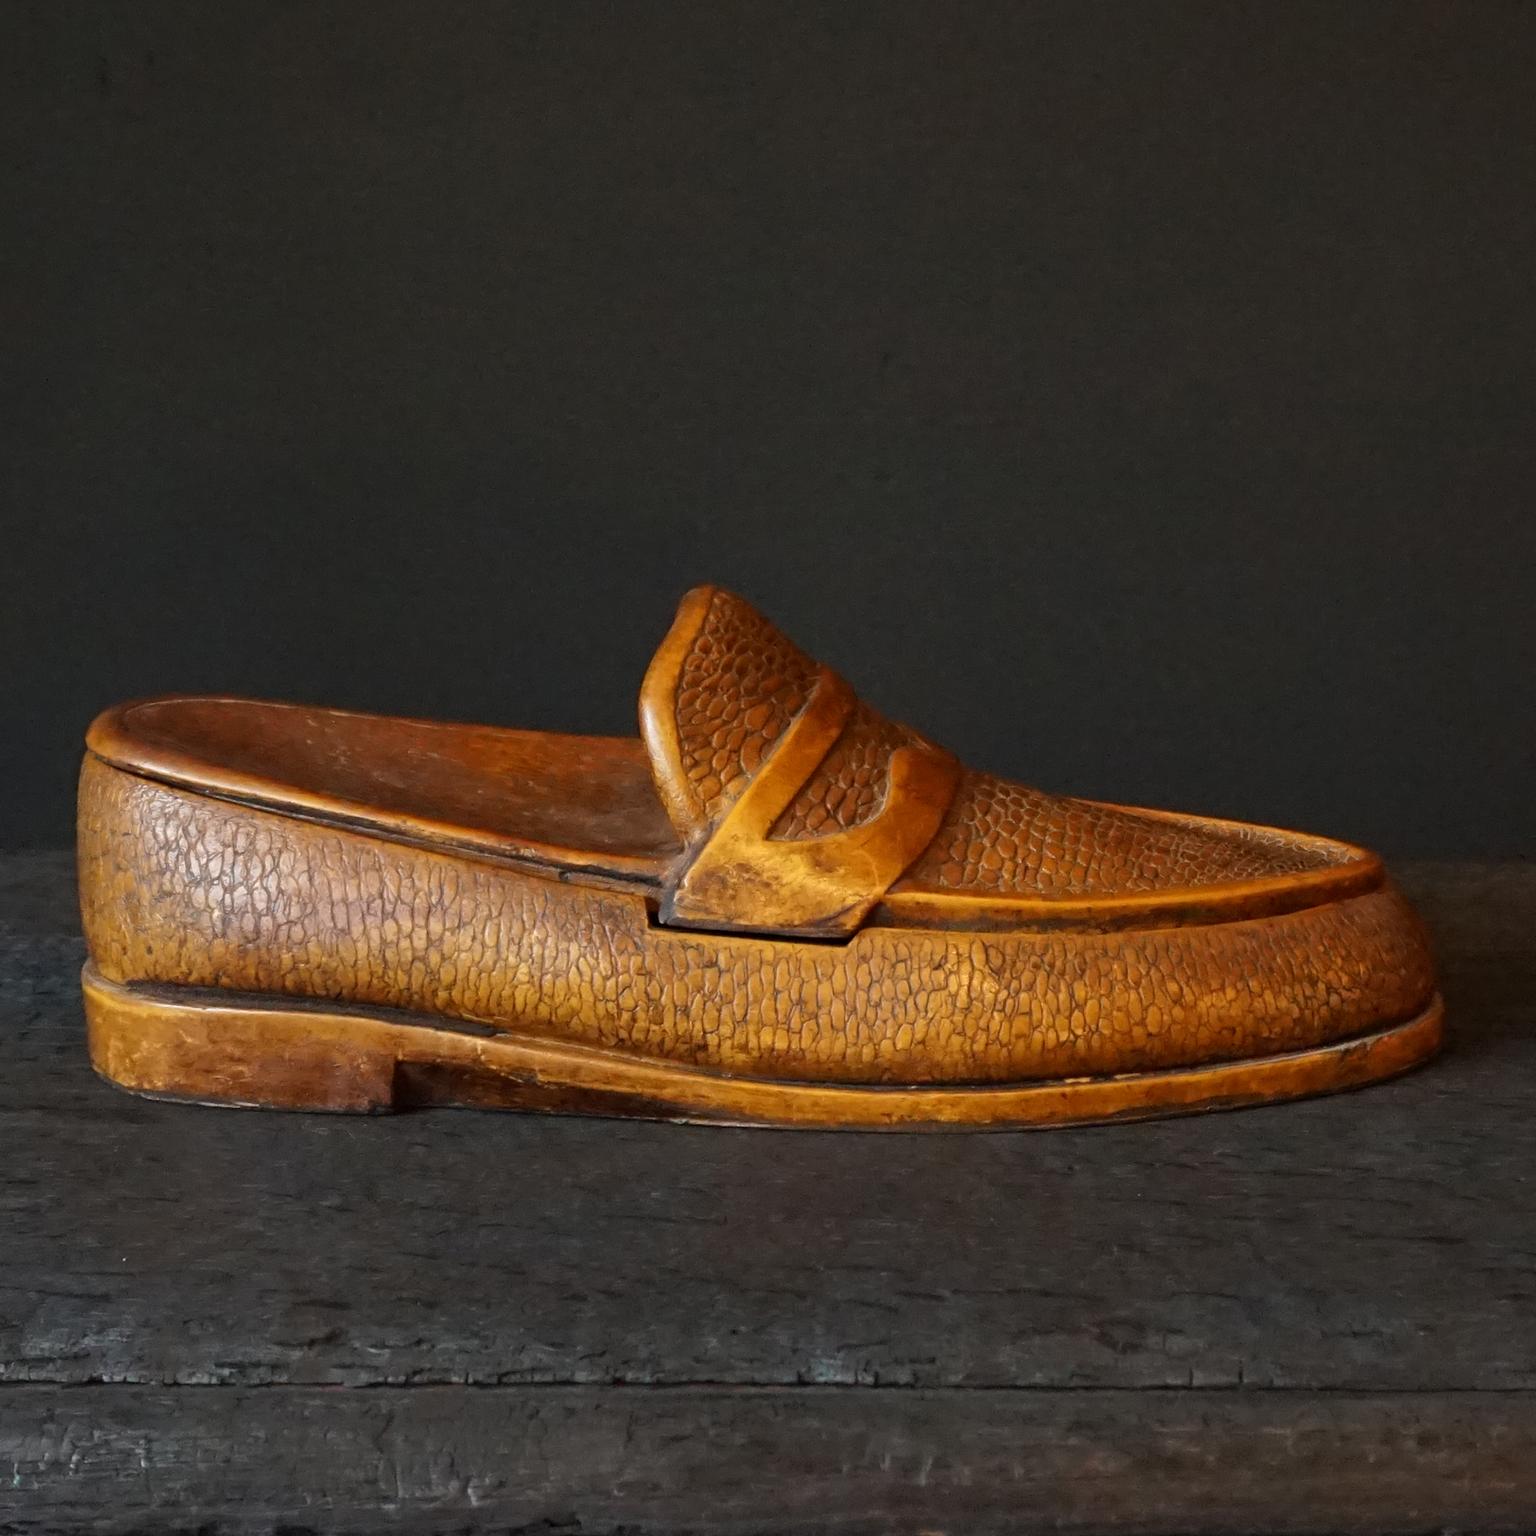 Very decorative larger than life French 1950s fake wood foam penny loafer with reptile design shoe-shaped box.
This funny item is in fact made from a high-density polyurethane foam and painted to look like a real carved wooden shoe. 
The